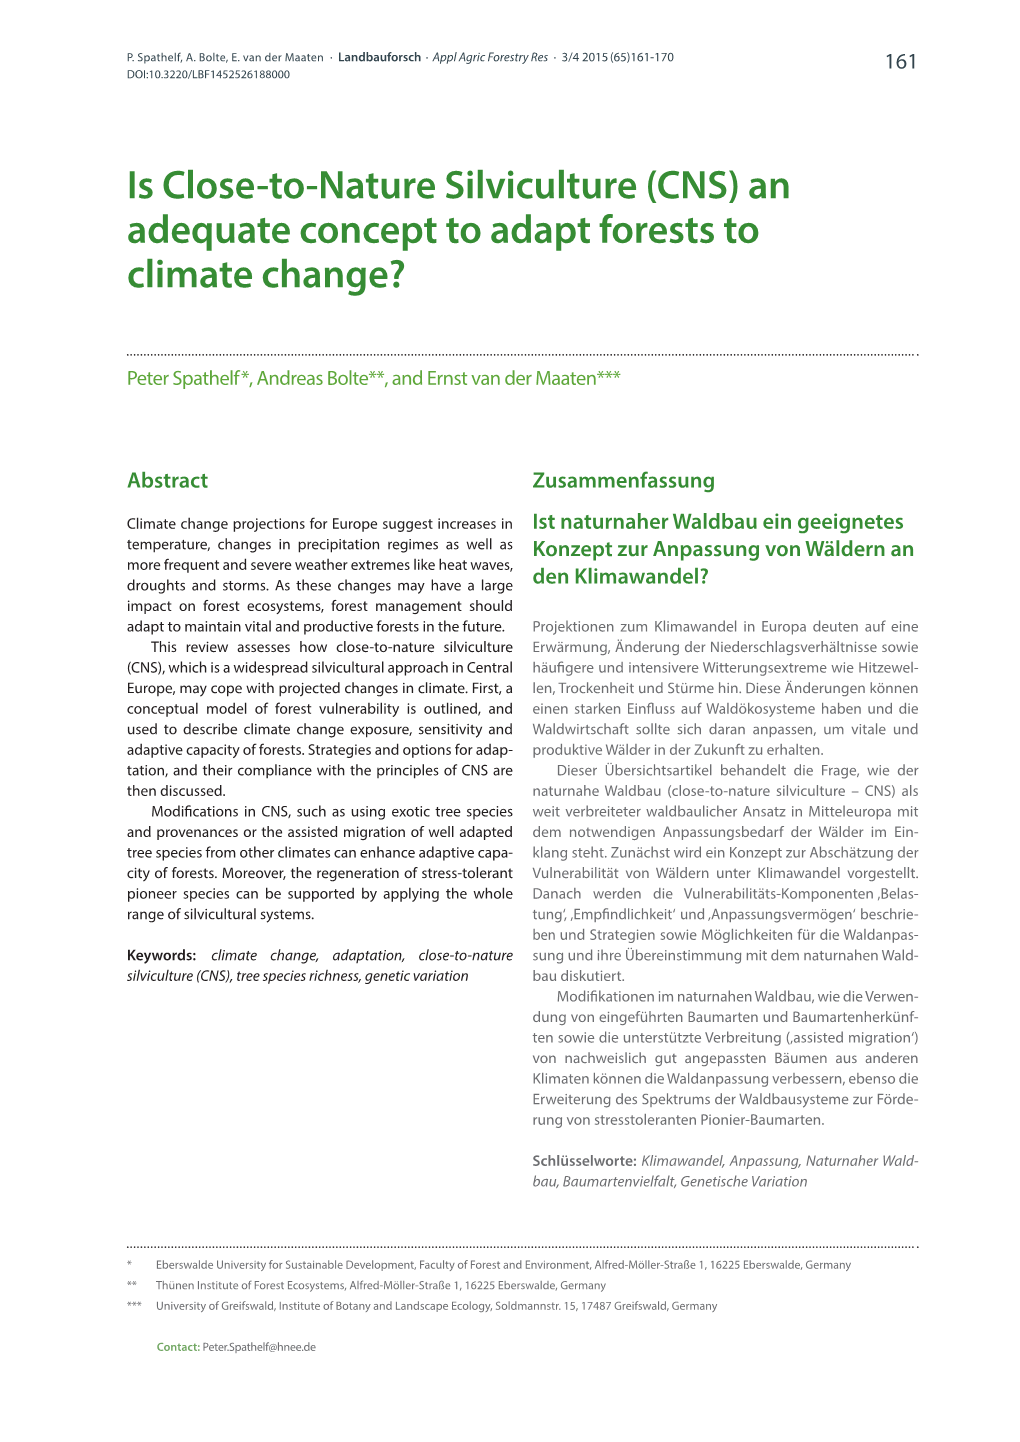 Is Close-To-Nature Silviculture (CNS) an Adequate Concept to Adapt Forests to Climate Change?